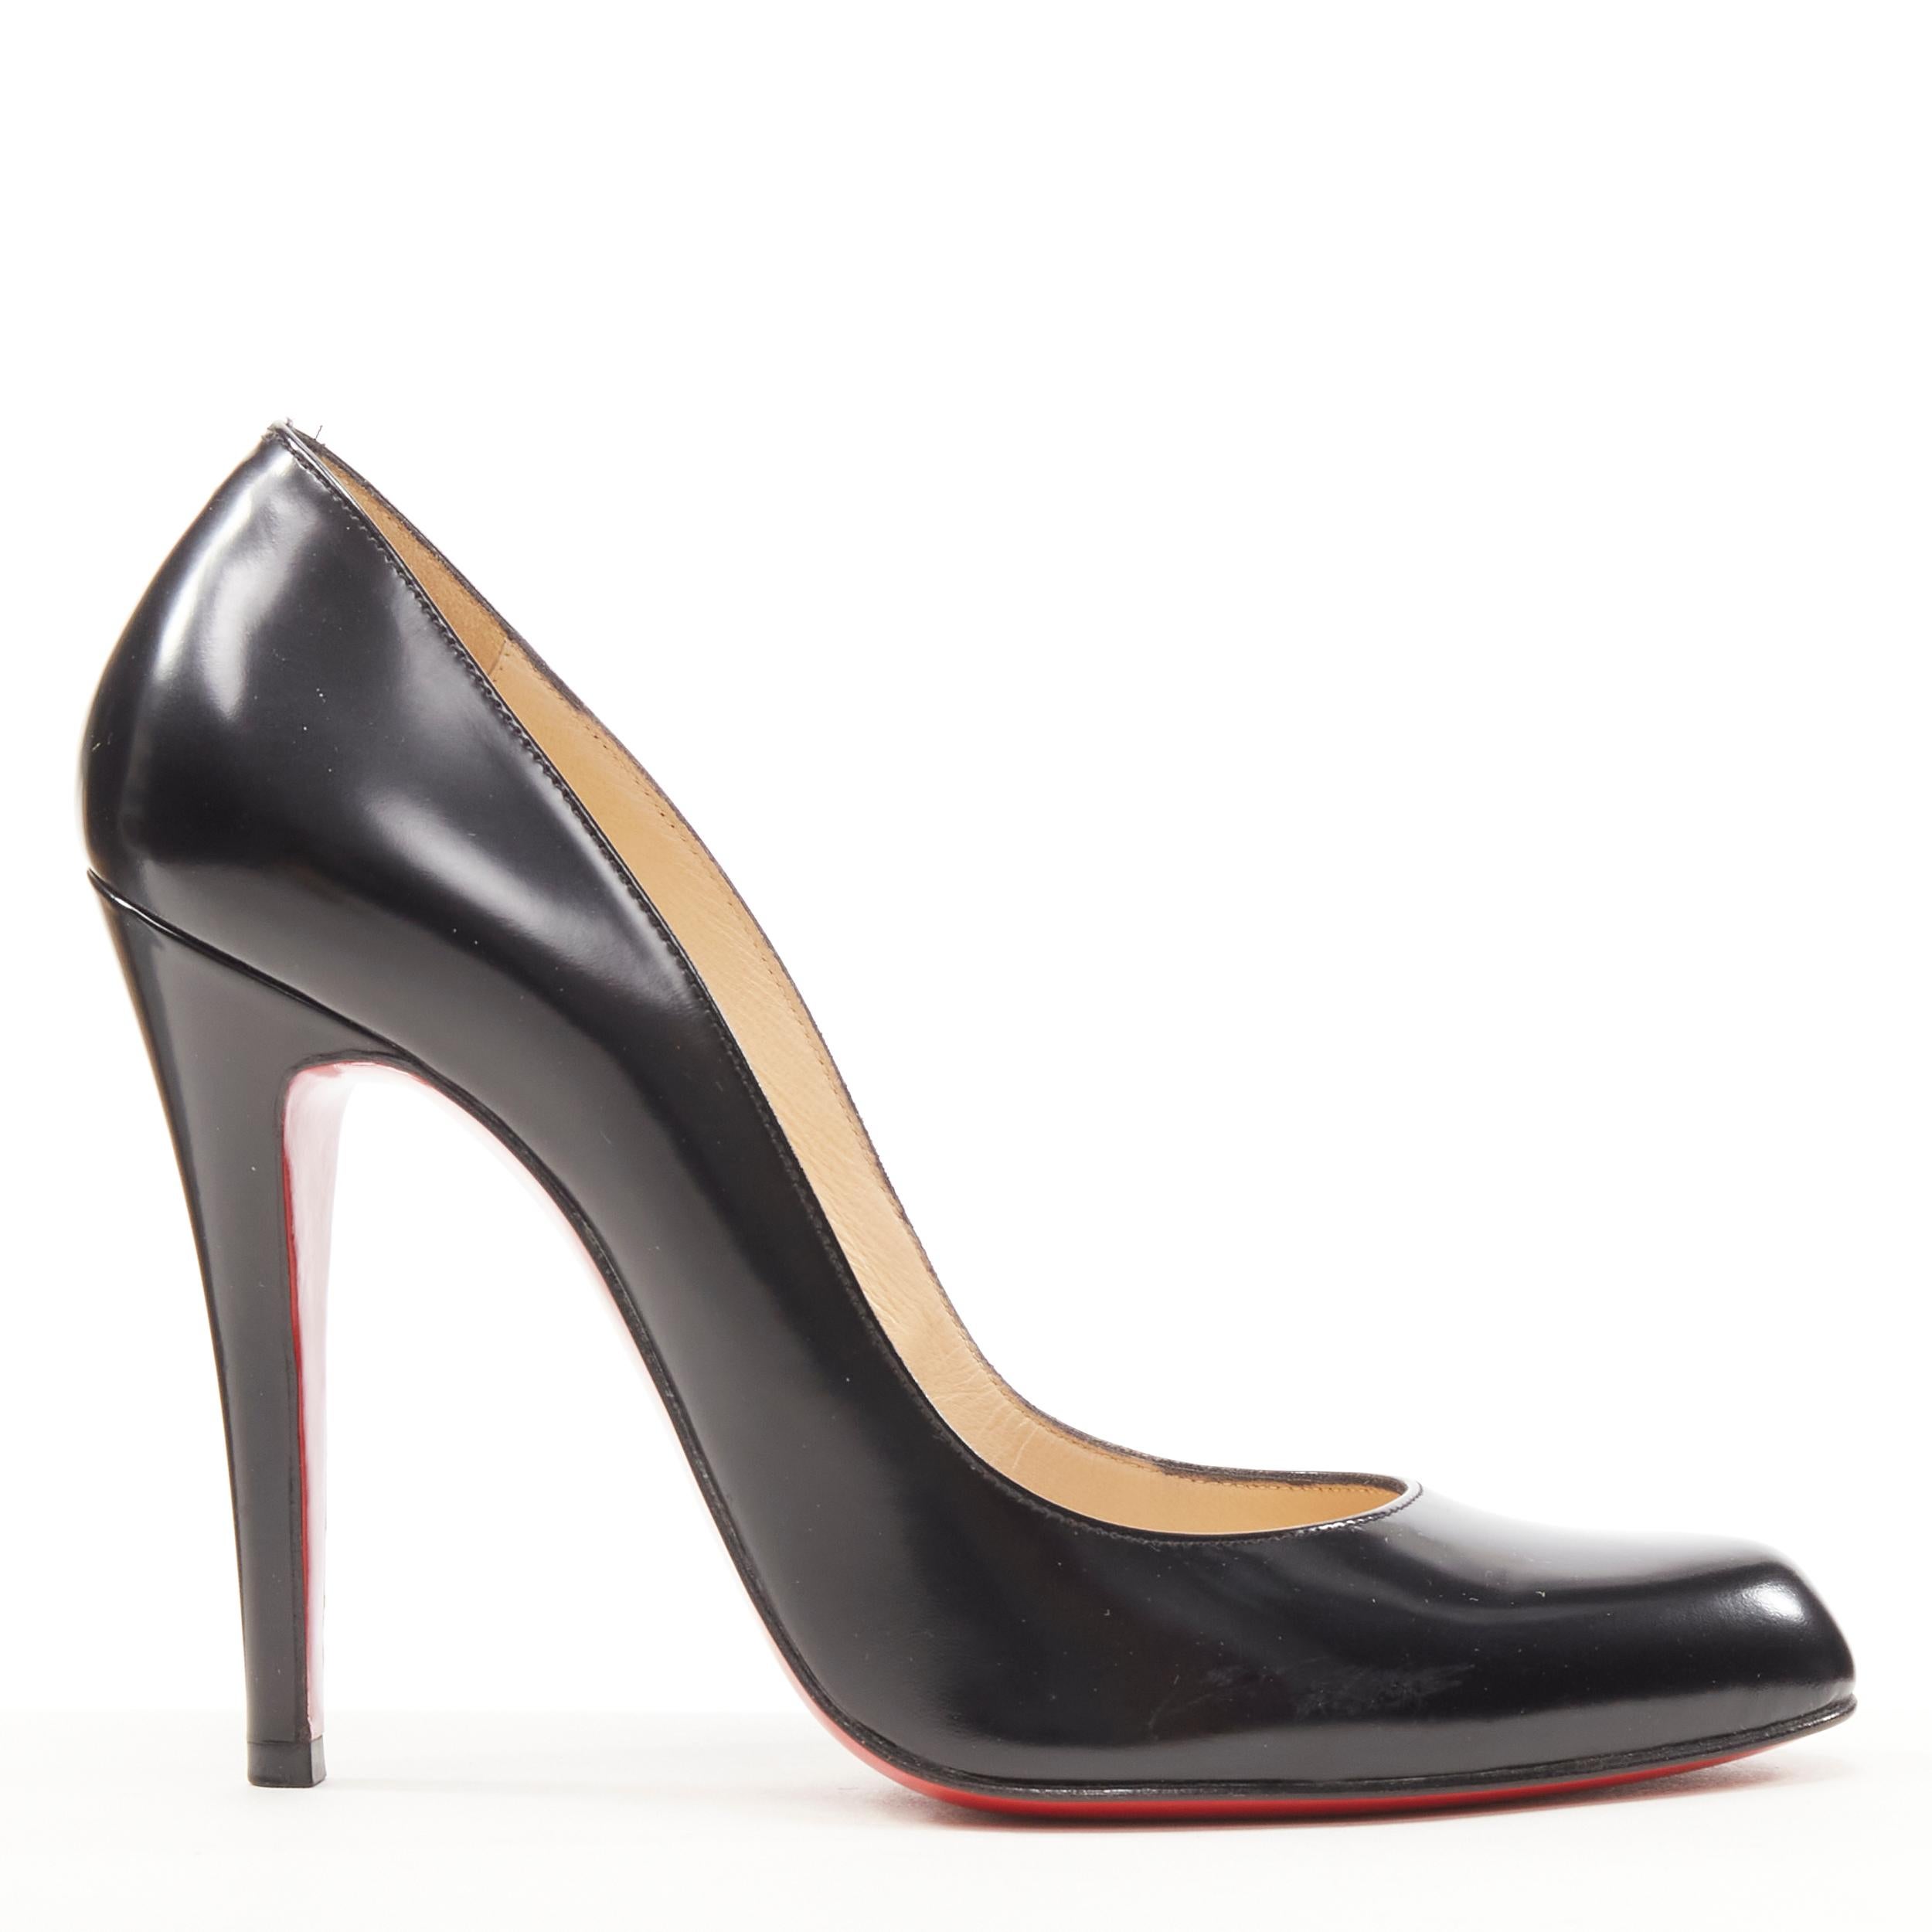 CHRISTIAN LOUBOUTIN black polished leather high heel classic court shoes EU38 
Reference: SNKO/A00193 
Brand: Christian Louboutin 
Material: Leather 
Color: Black 
Pattern: Solid 
Made in: Italy 

SIZING: 
Designer Size: EU 38 
Size Reference: EU38